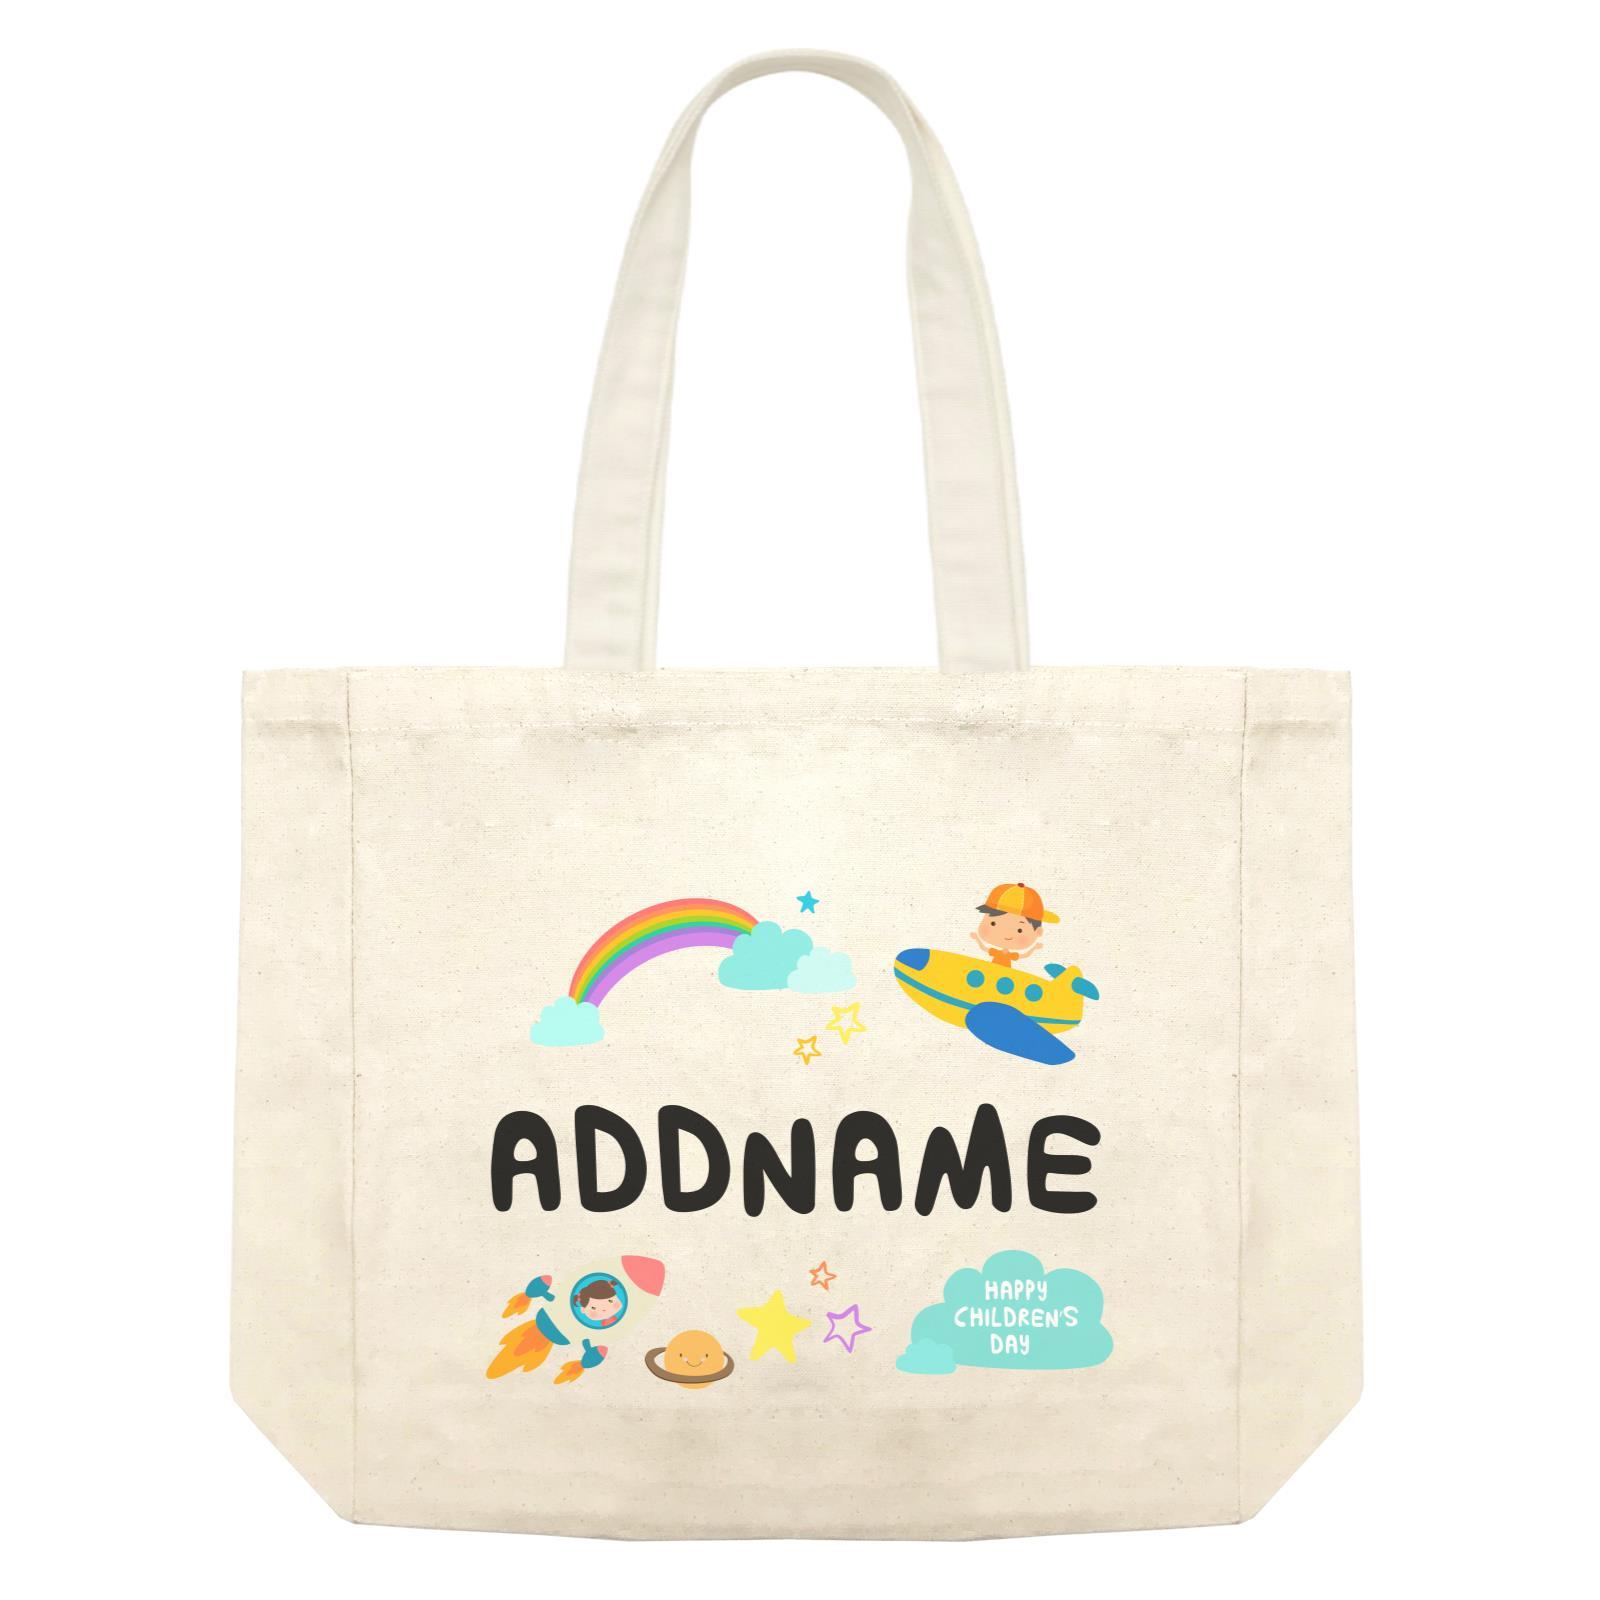 Children's Day Gift Series Adventure Boy Space Rainbow Addname Shopping Bag